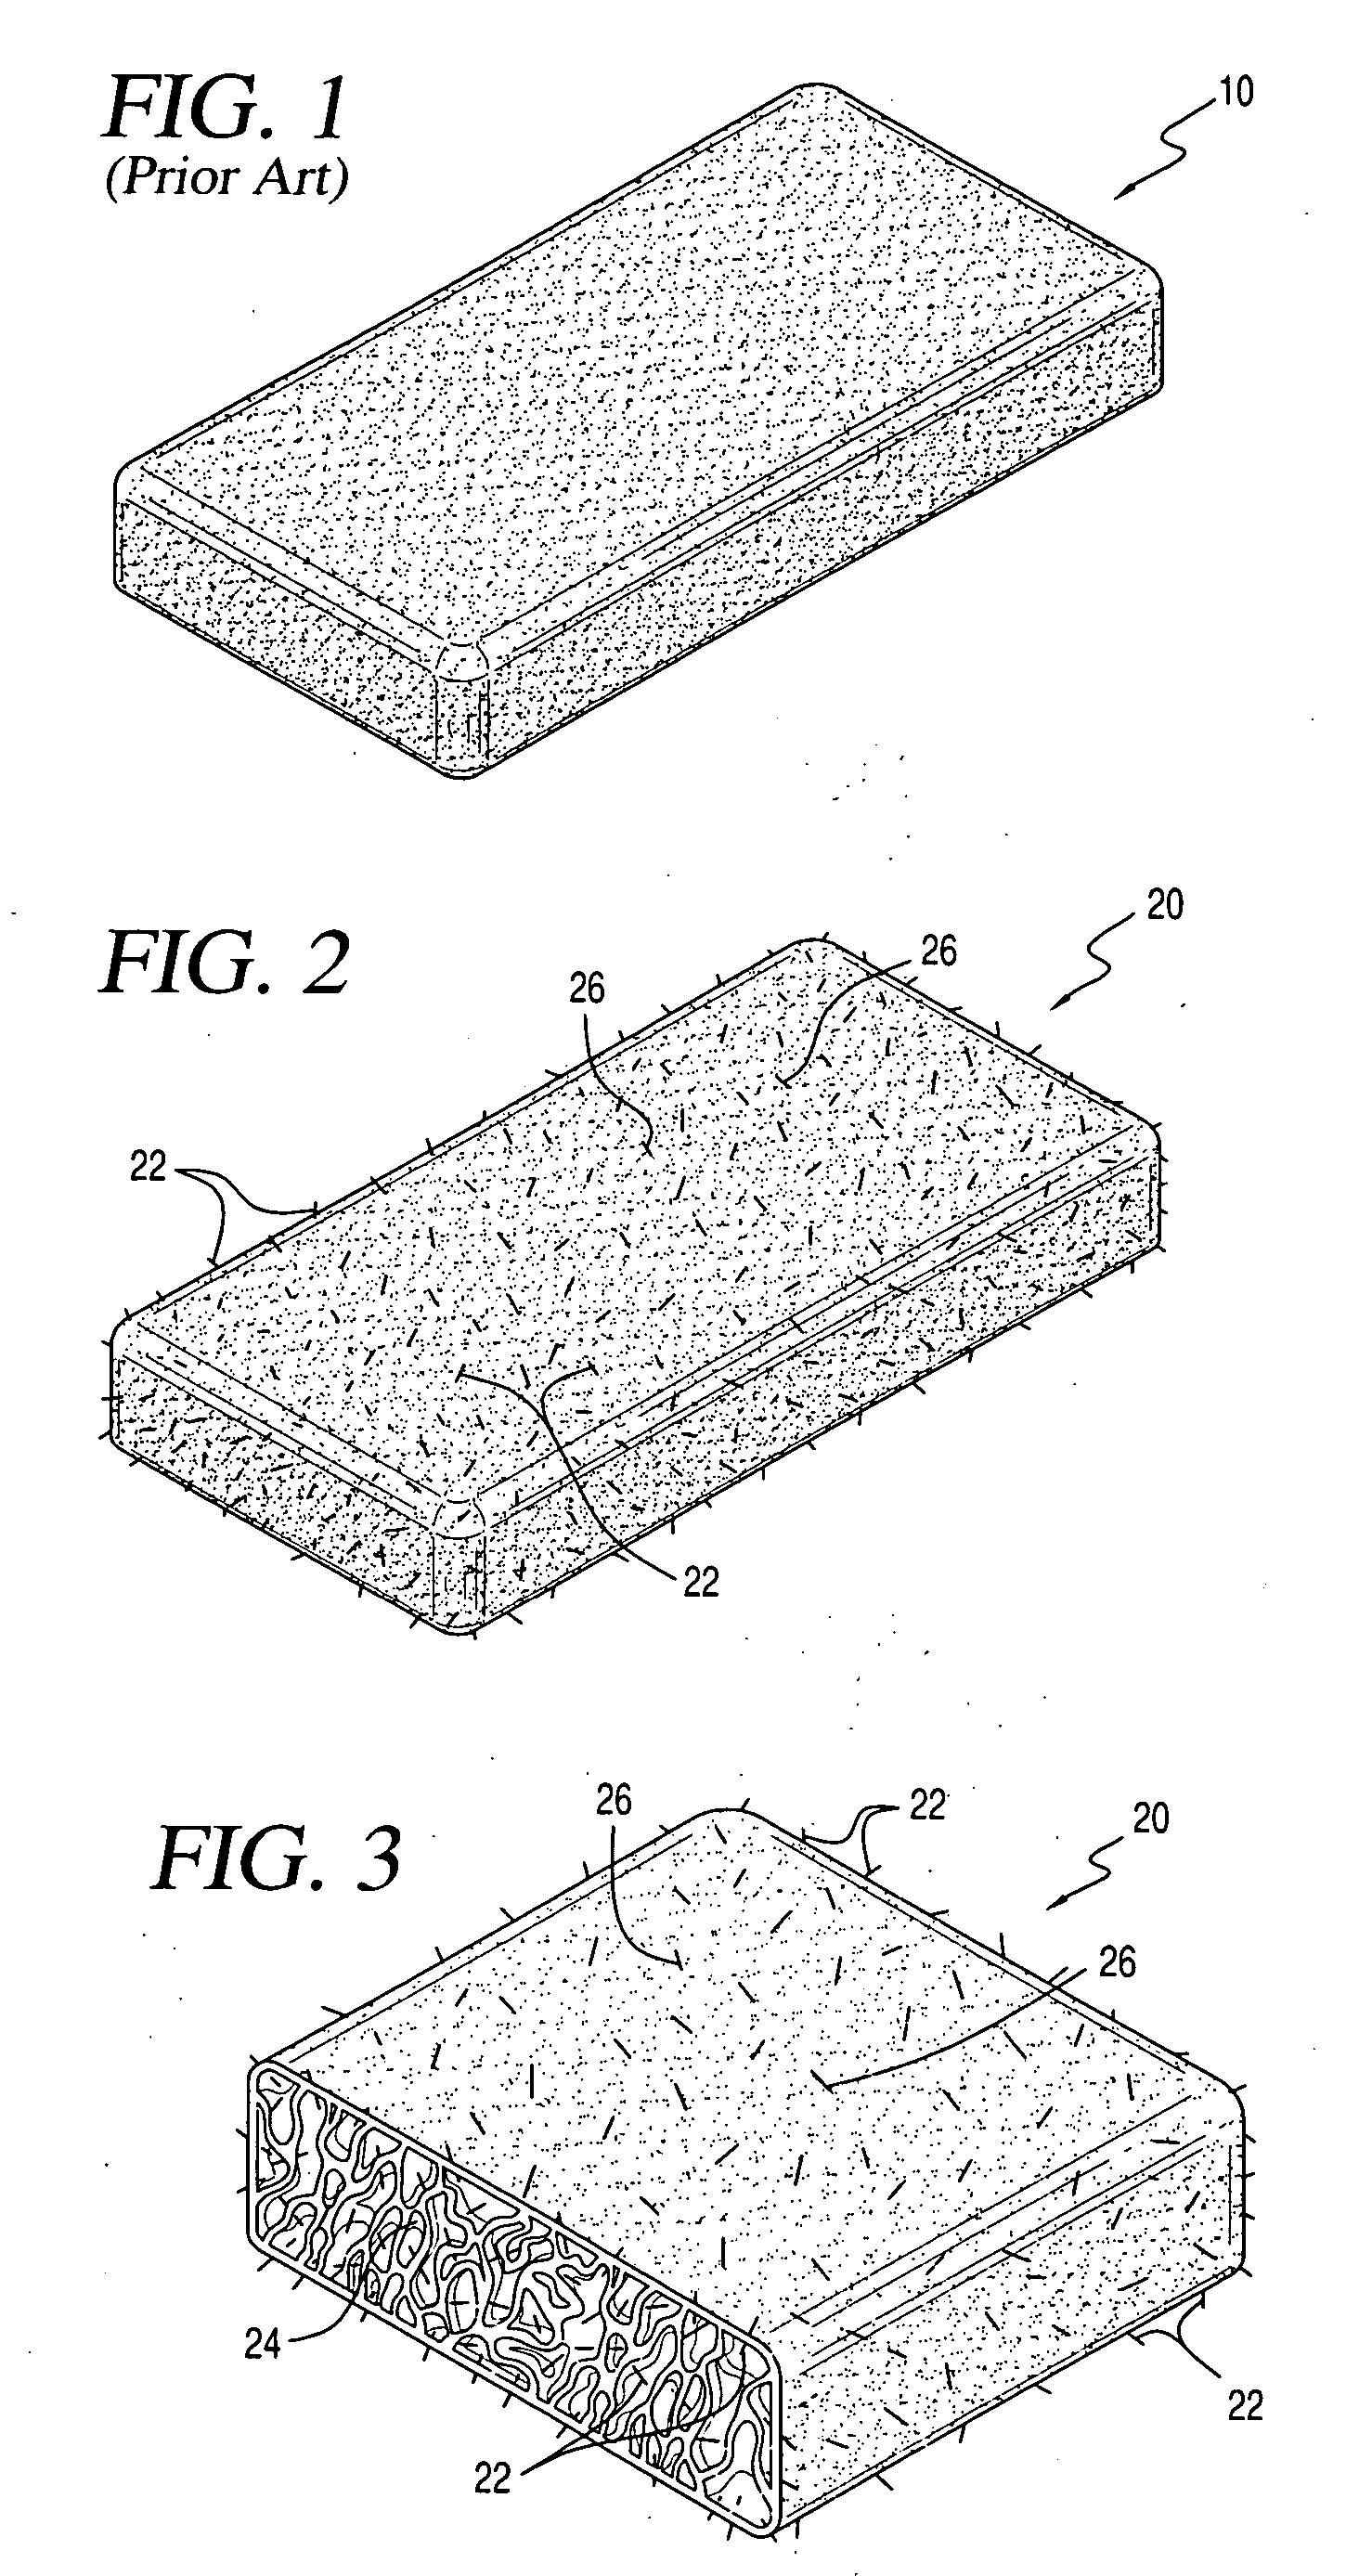 Bone graft composition, method and implant